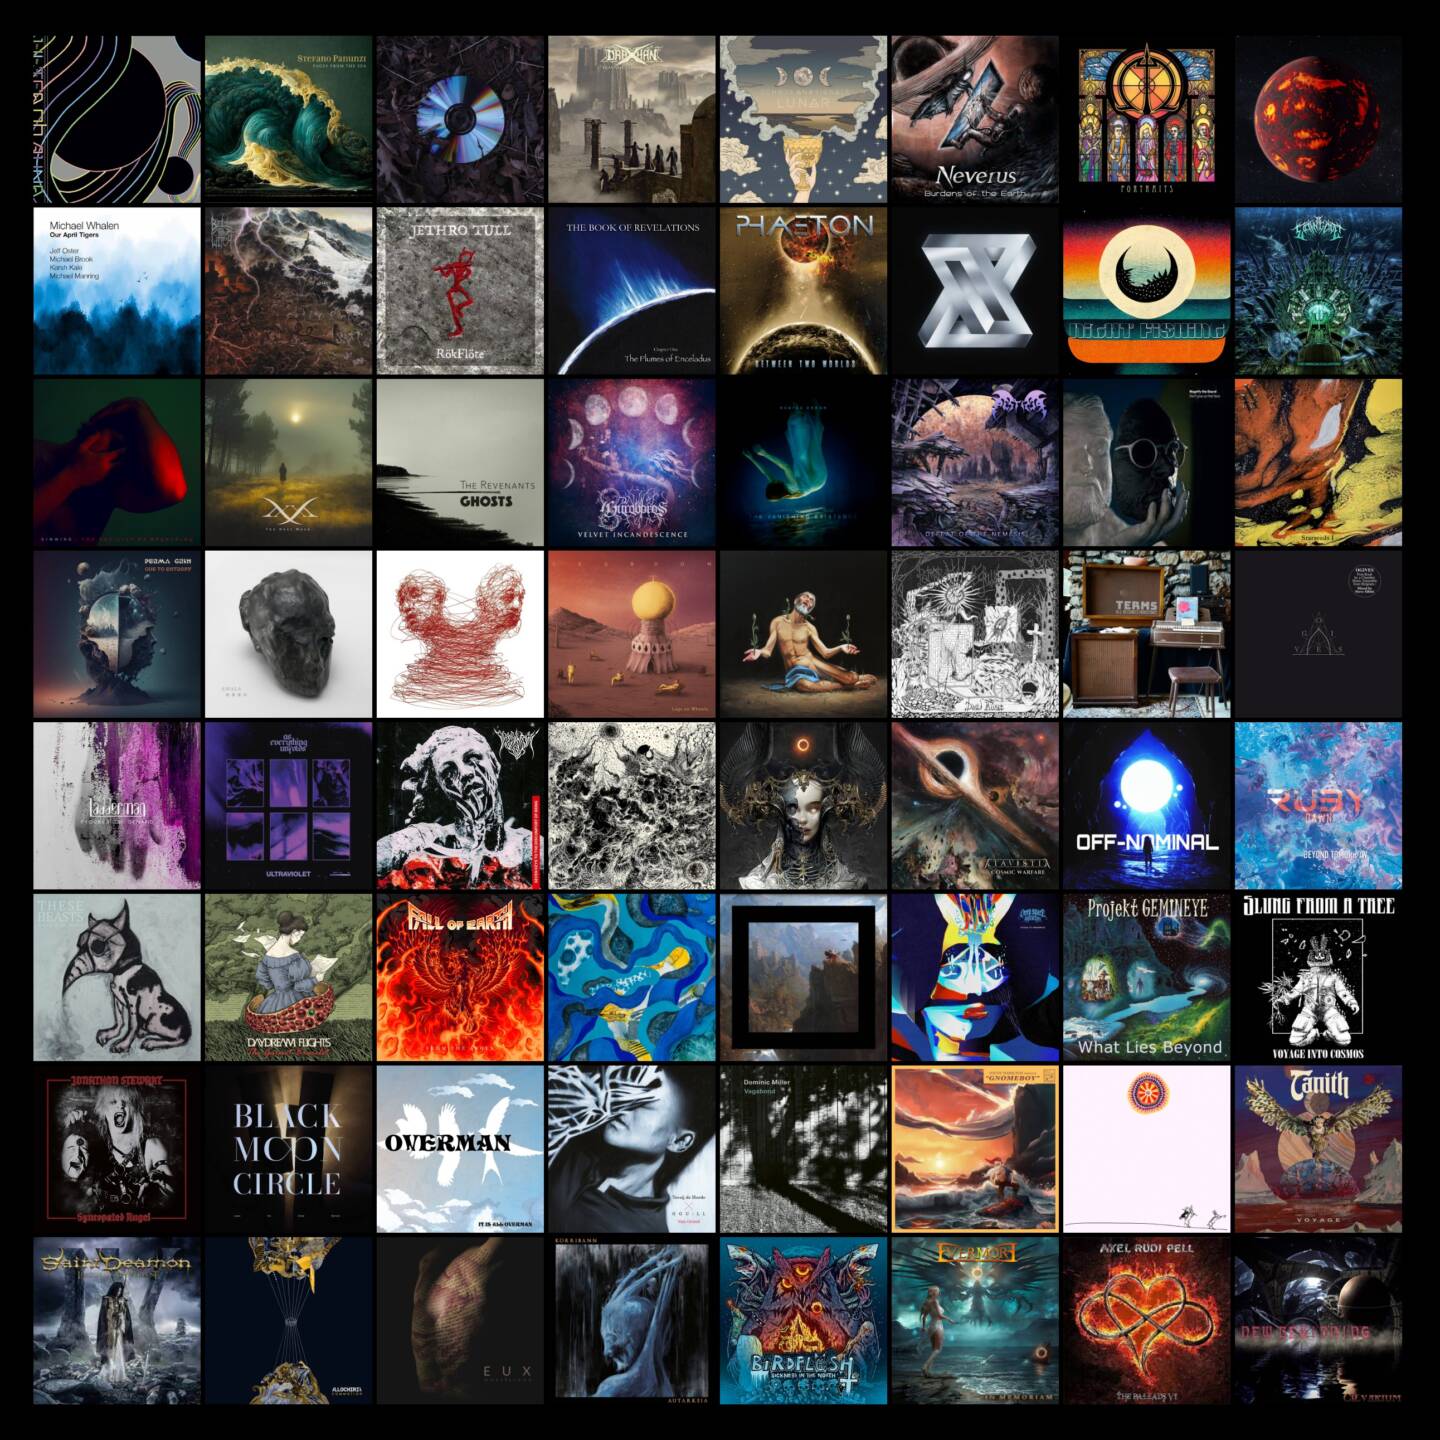 Chasing record after record: 69 releases overall this week including 10 highlights, 111 mini reviews so far this year!